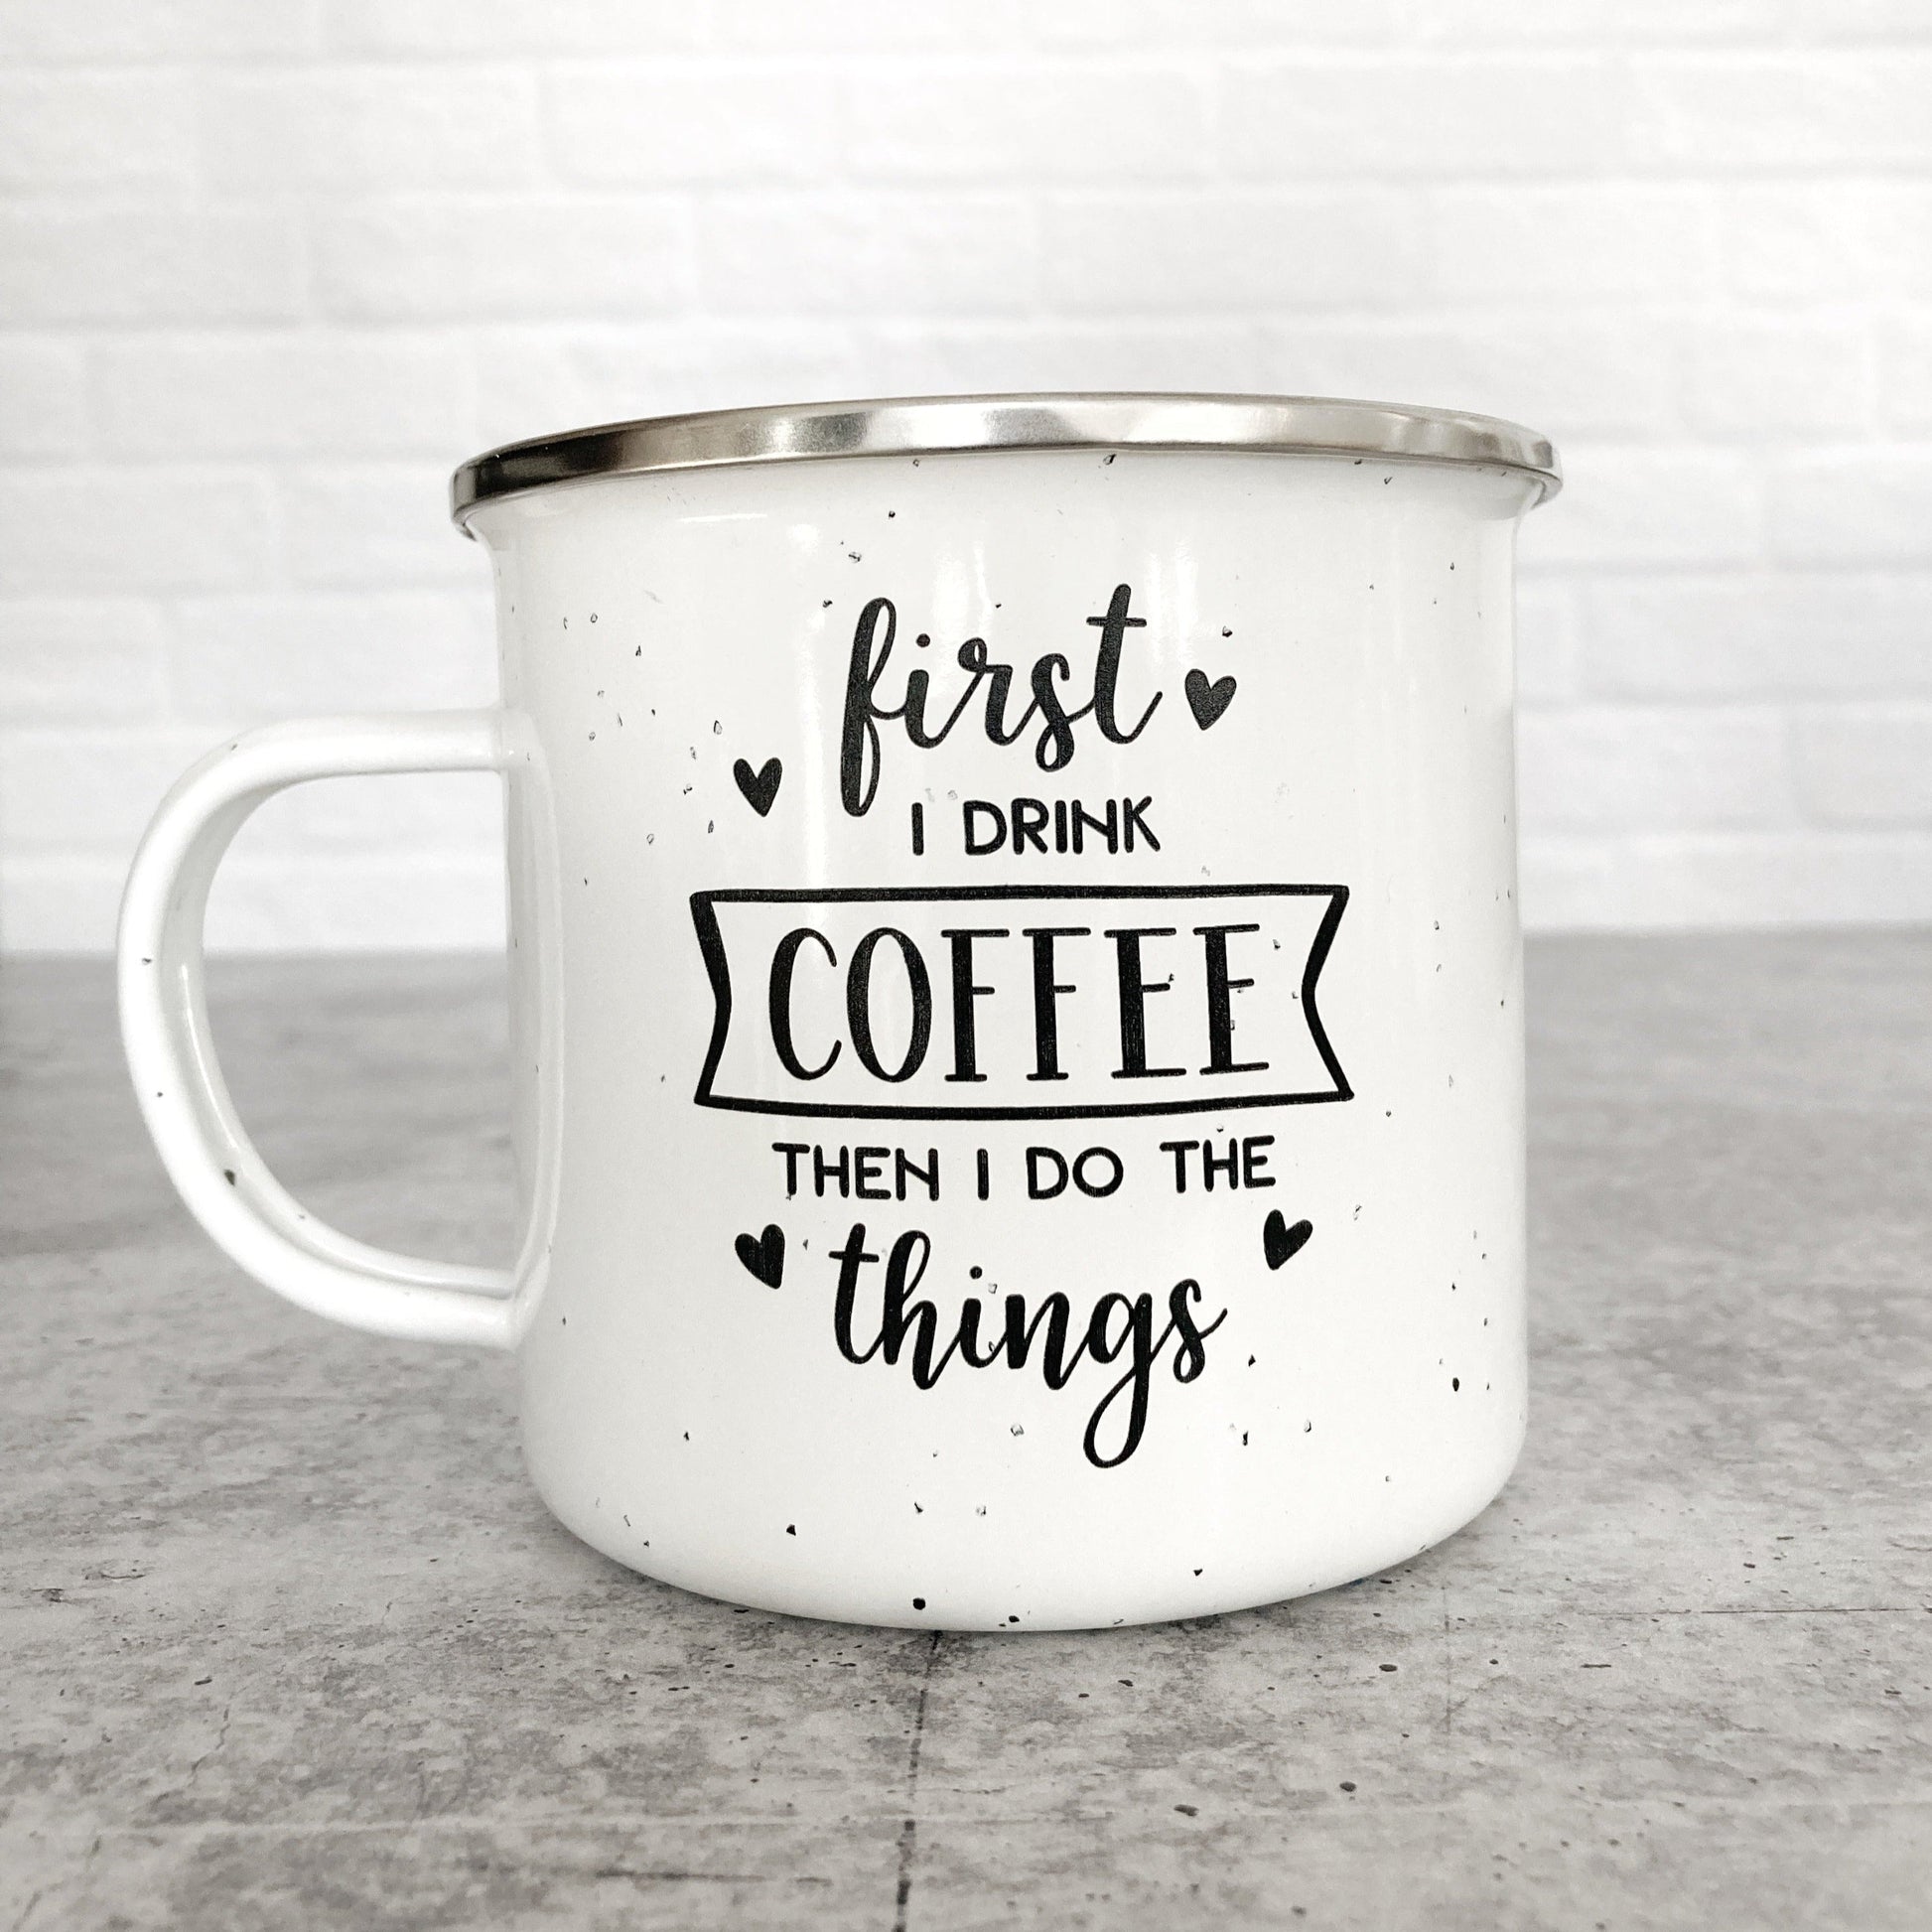 First I Drink the Coffee Then I do The Things Design on a white enamel mug